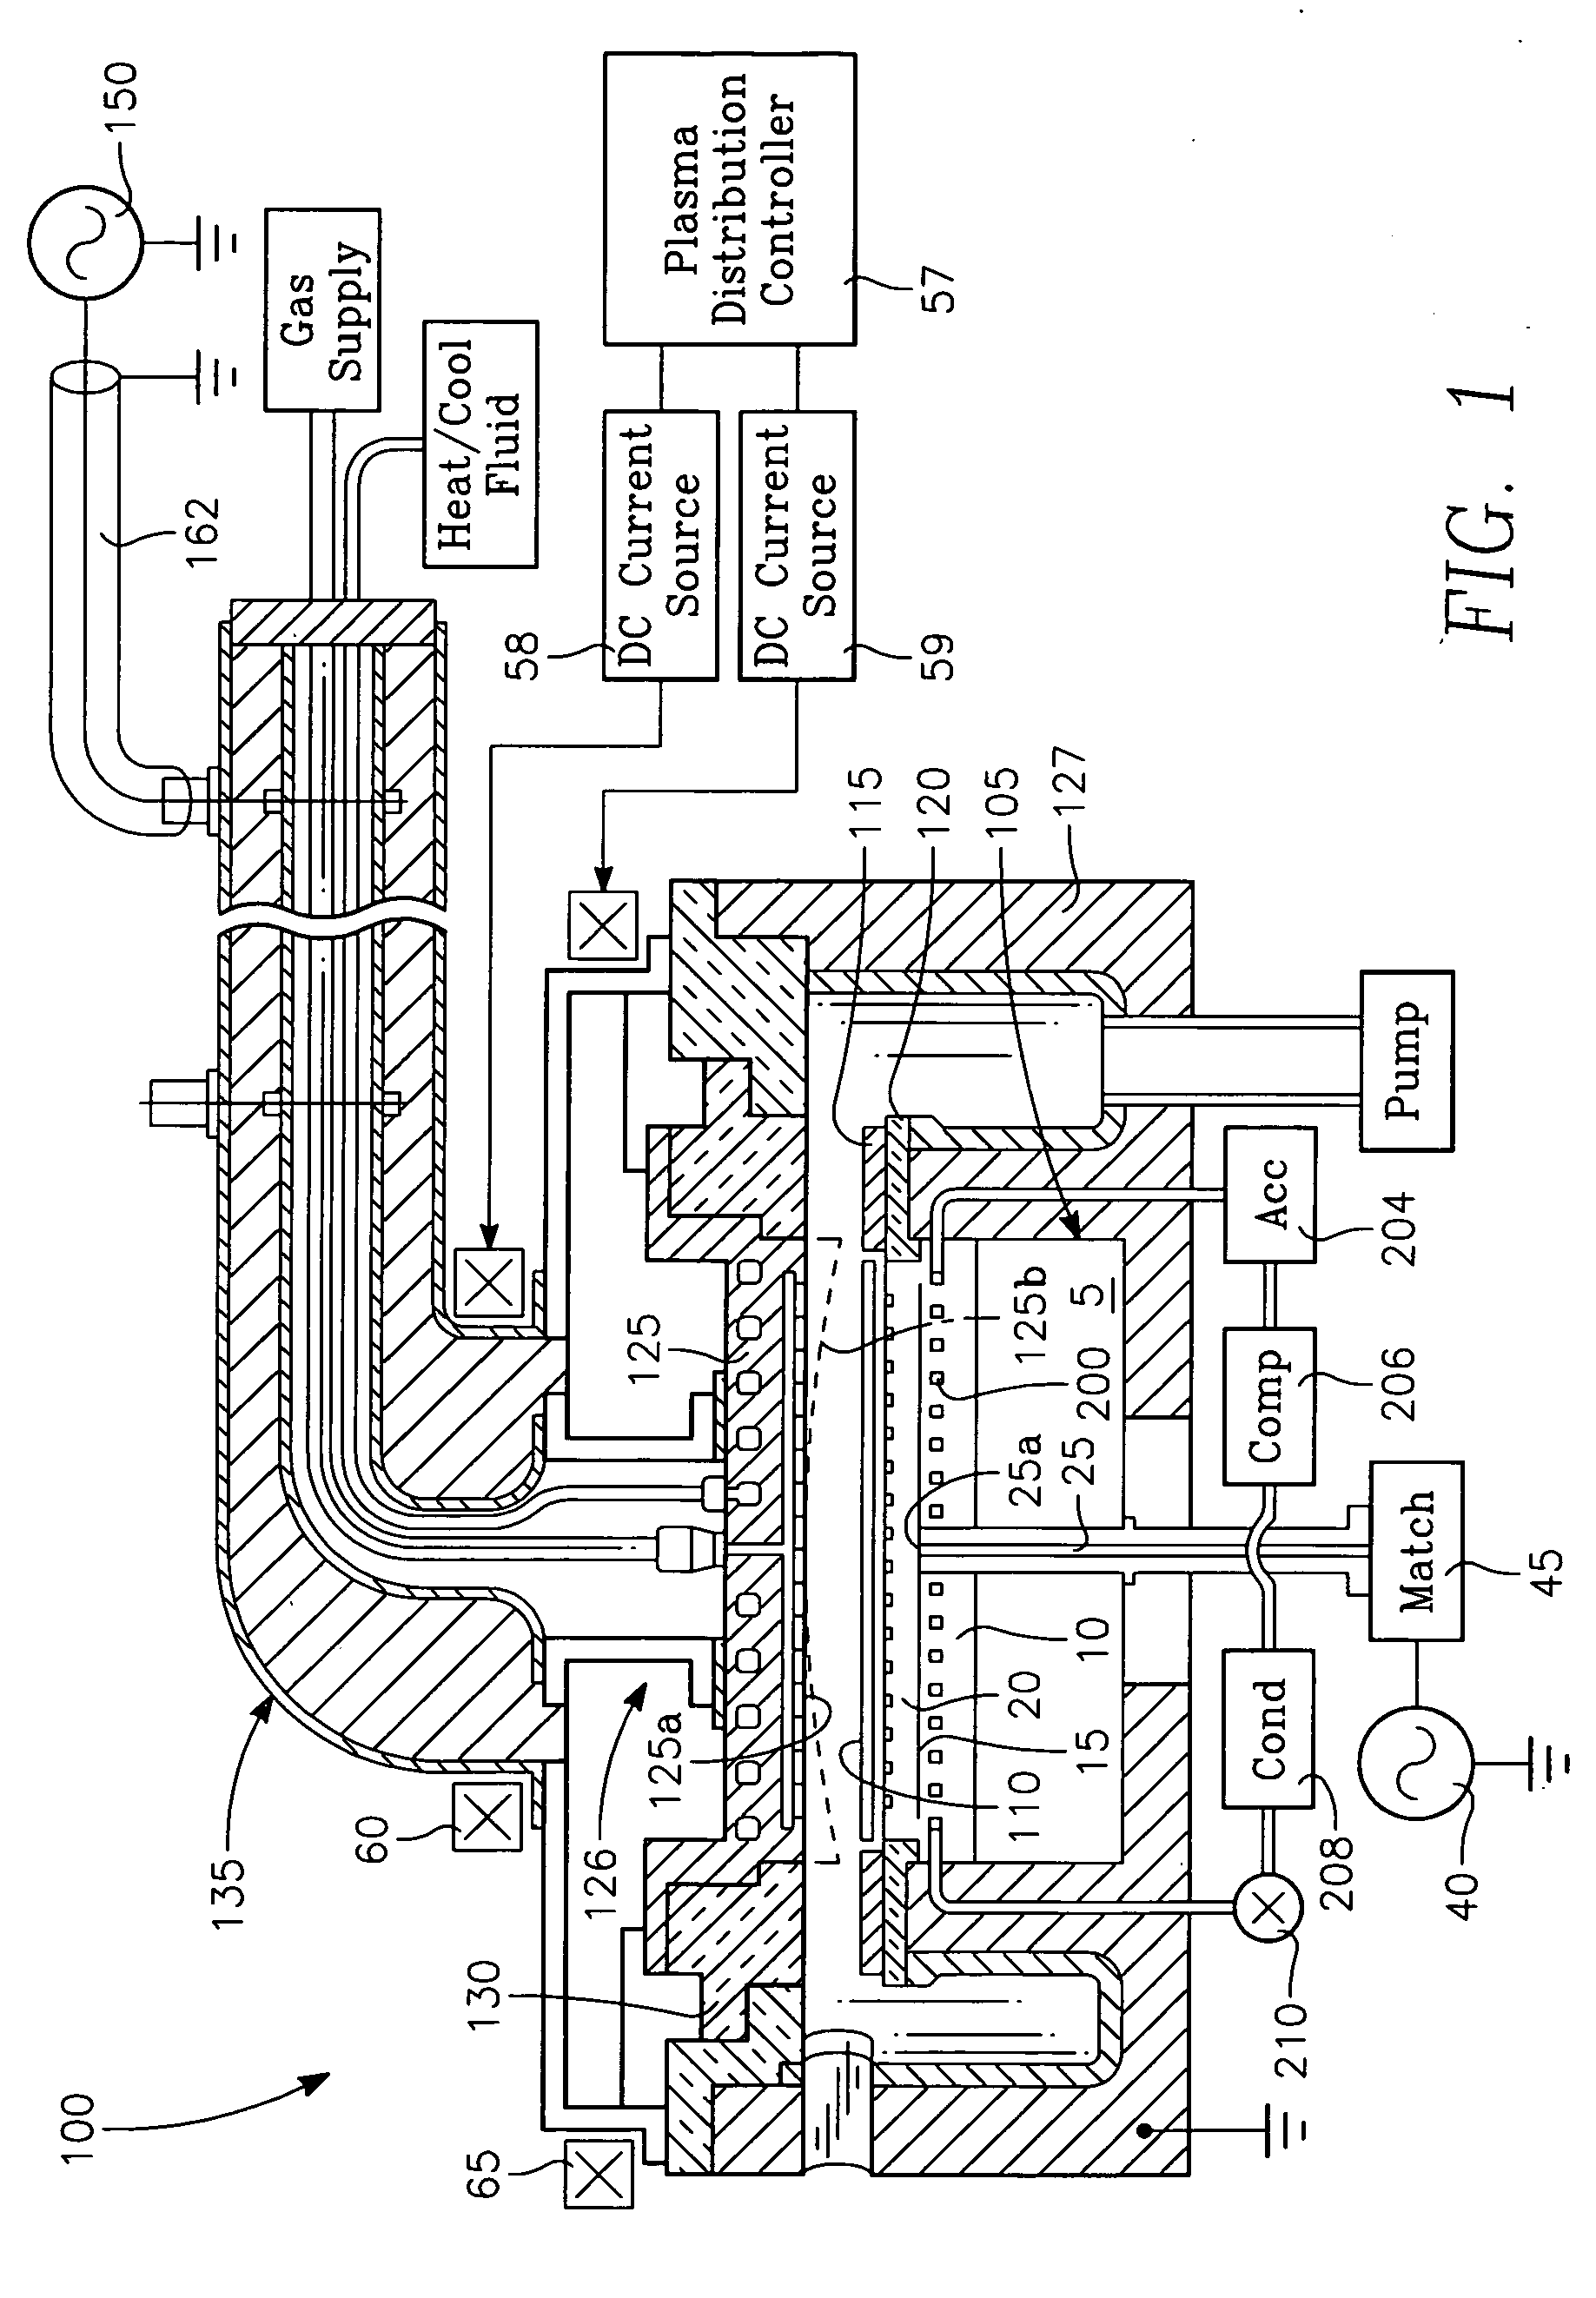 Method of processing a workpiece in a plasma reactor using feed forward thermal control